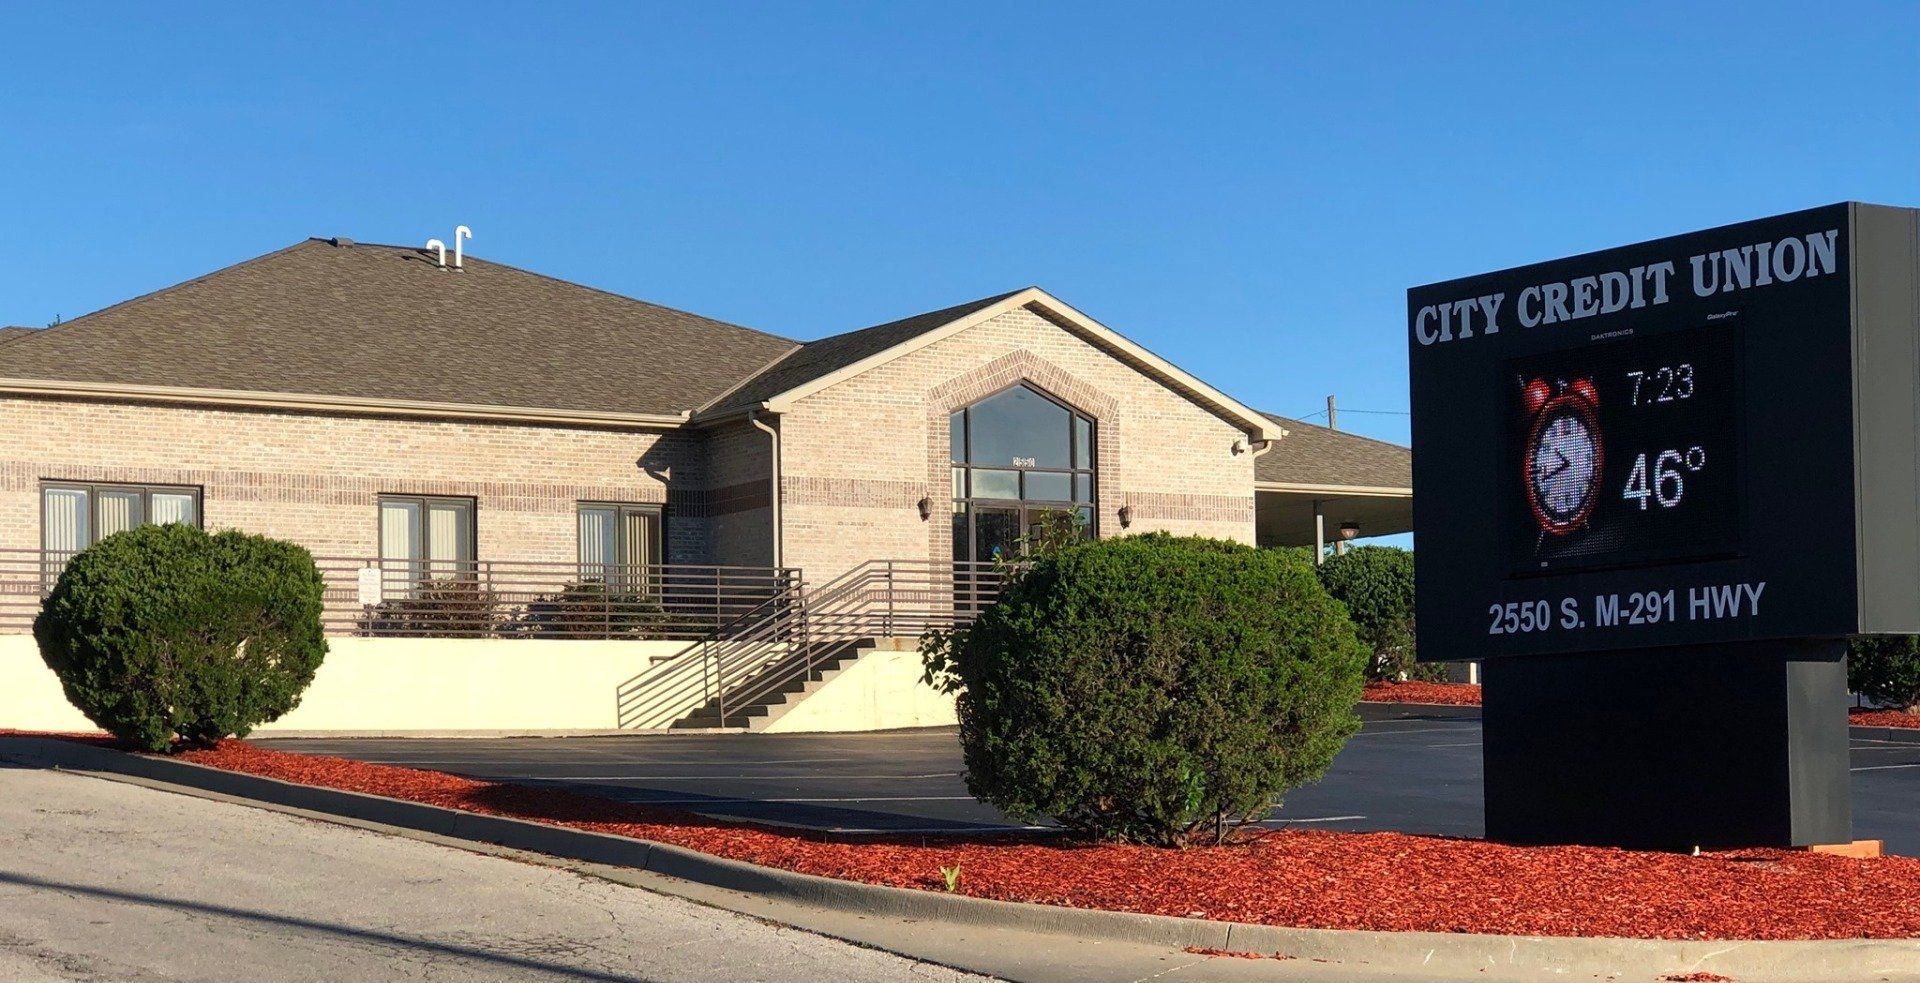 city credit union's location in Independence MO